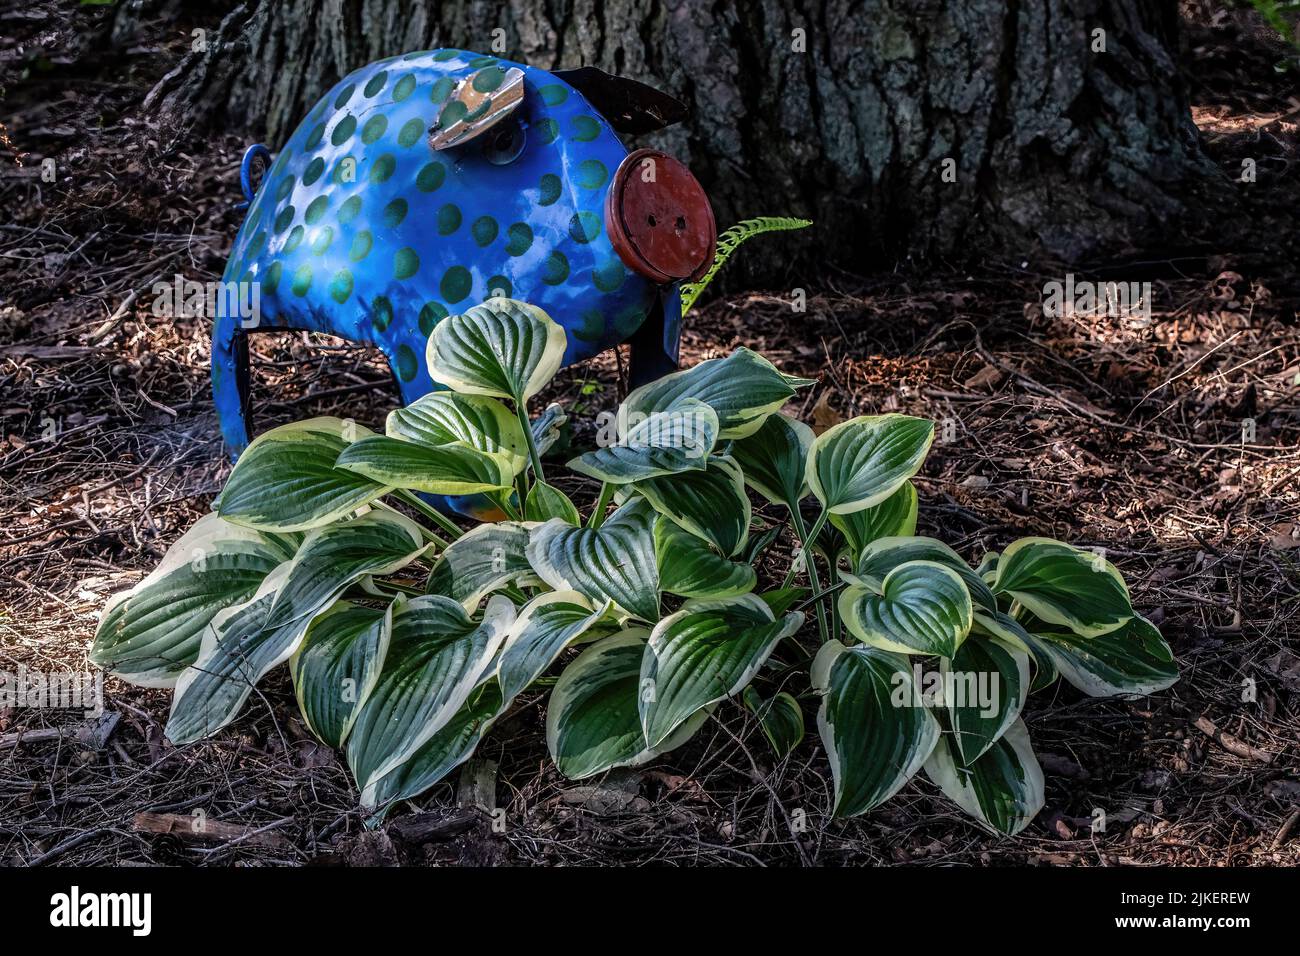 Blue polka dotted tin pig lawn ornament behind some beautiful hostas in a summer garden. Stock Photo